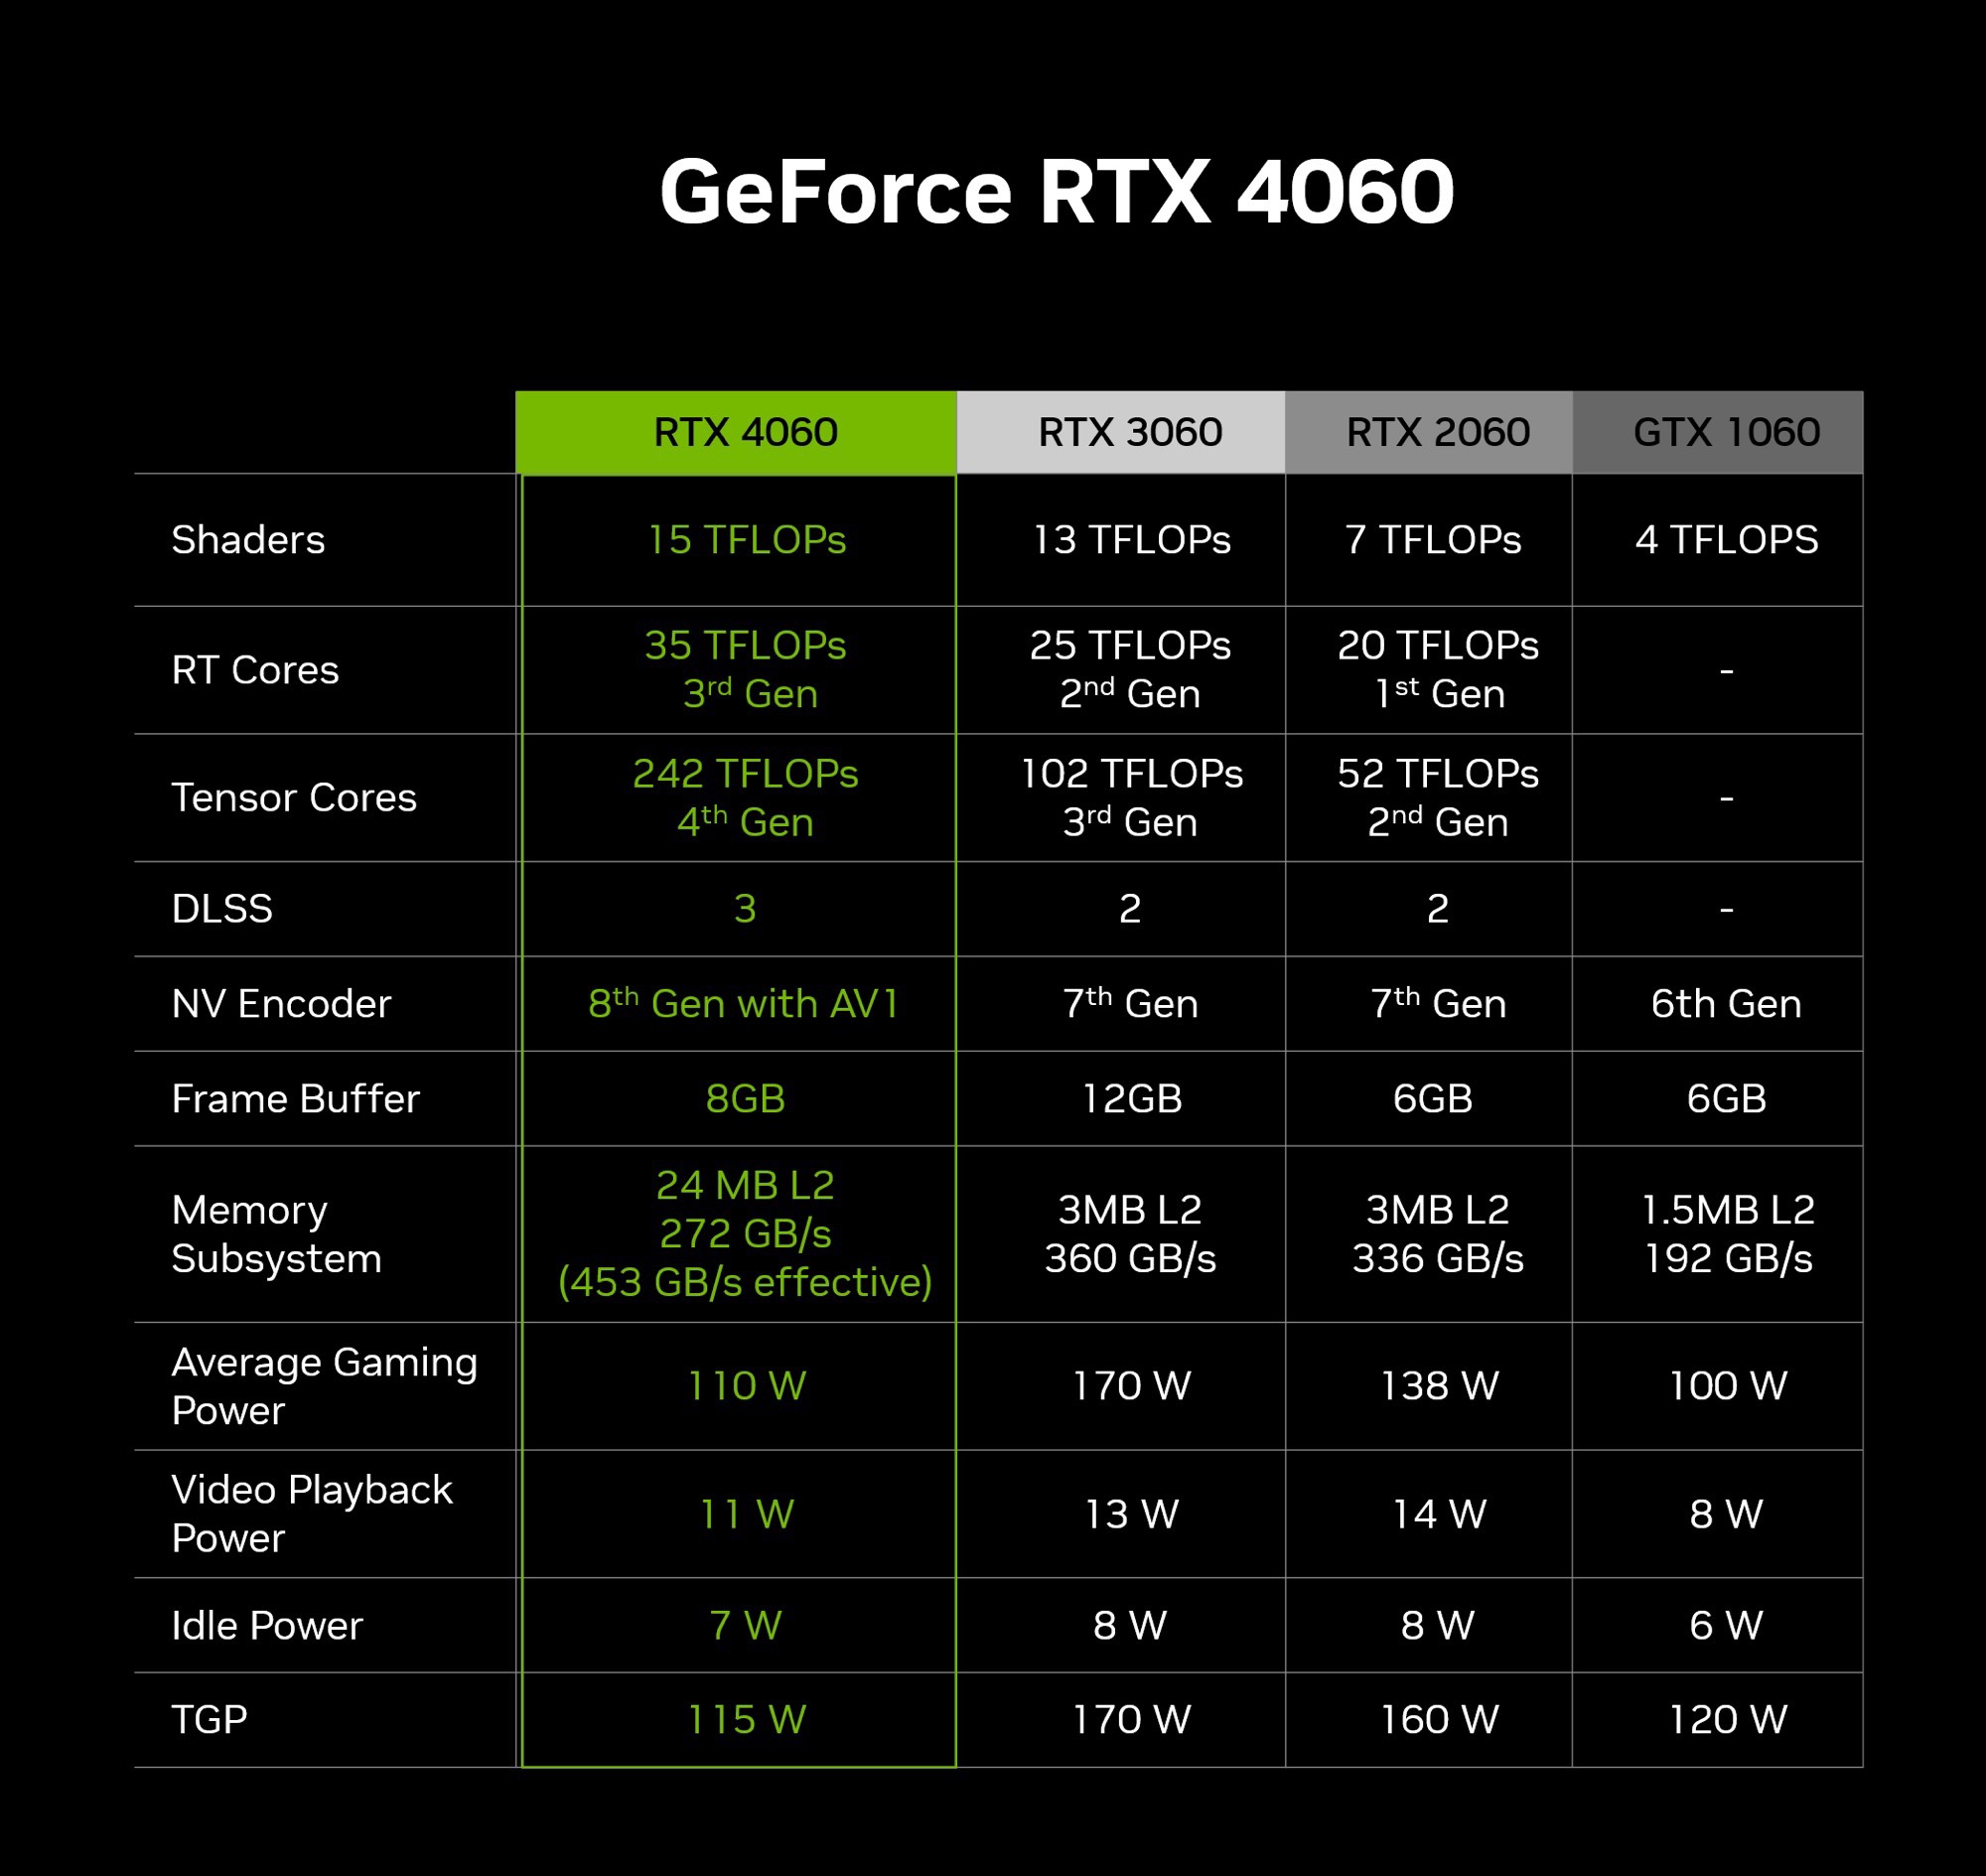 NVIDIA GeForce RTX 4060 Laptop AD107 GPU Tested, Up To 65% Faster Than RTX  3060 Laptop